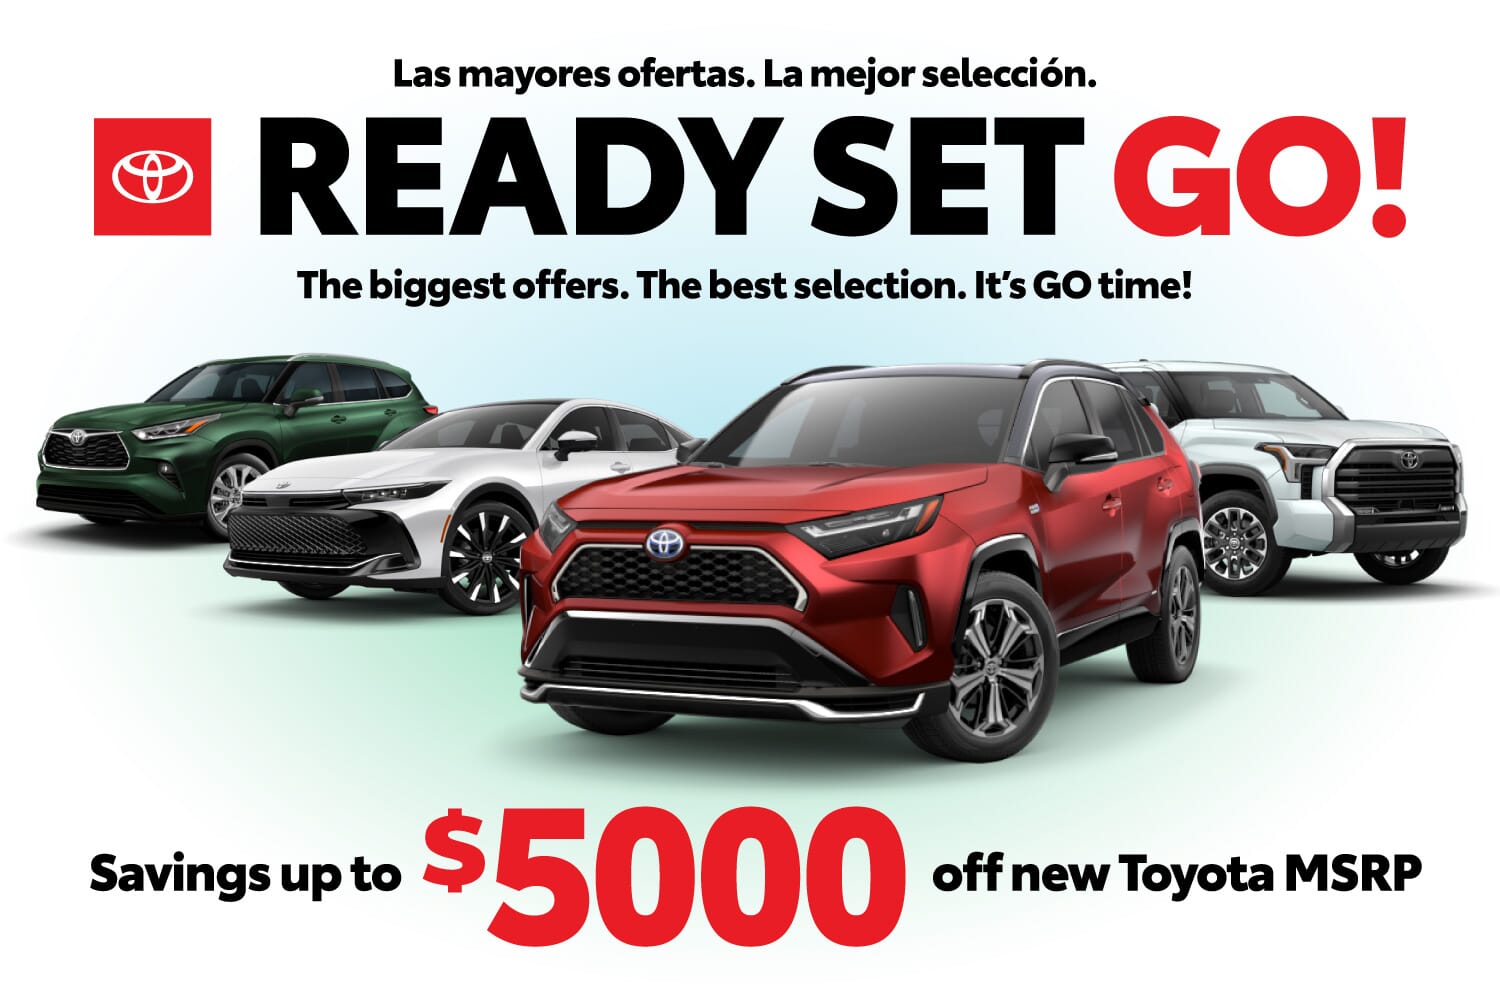 Toyota sale: Savings up to $5000 off MSRP